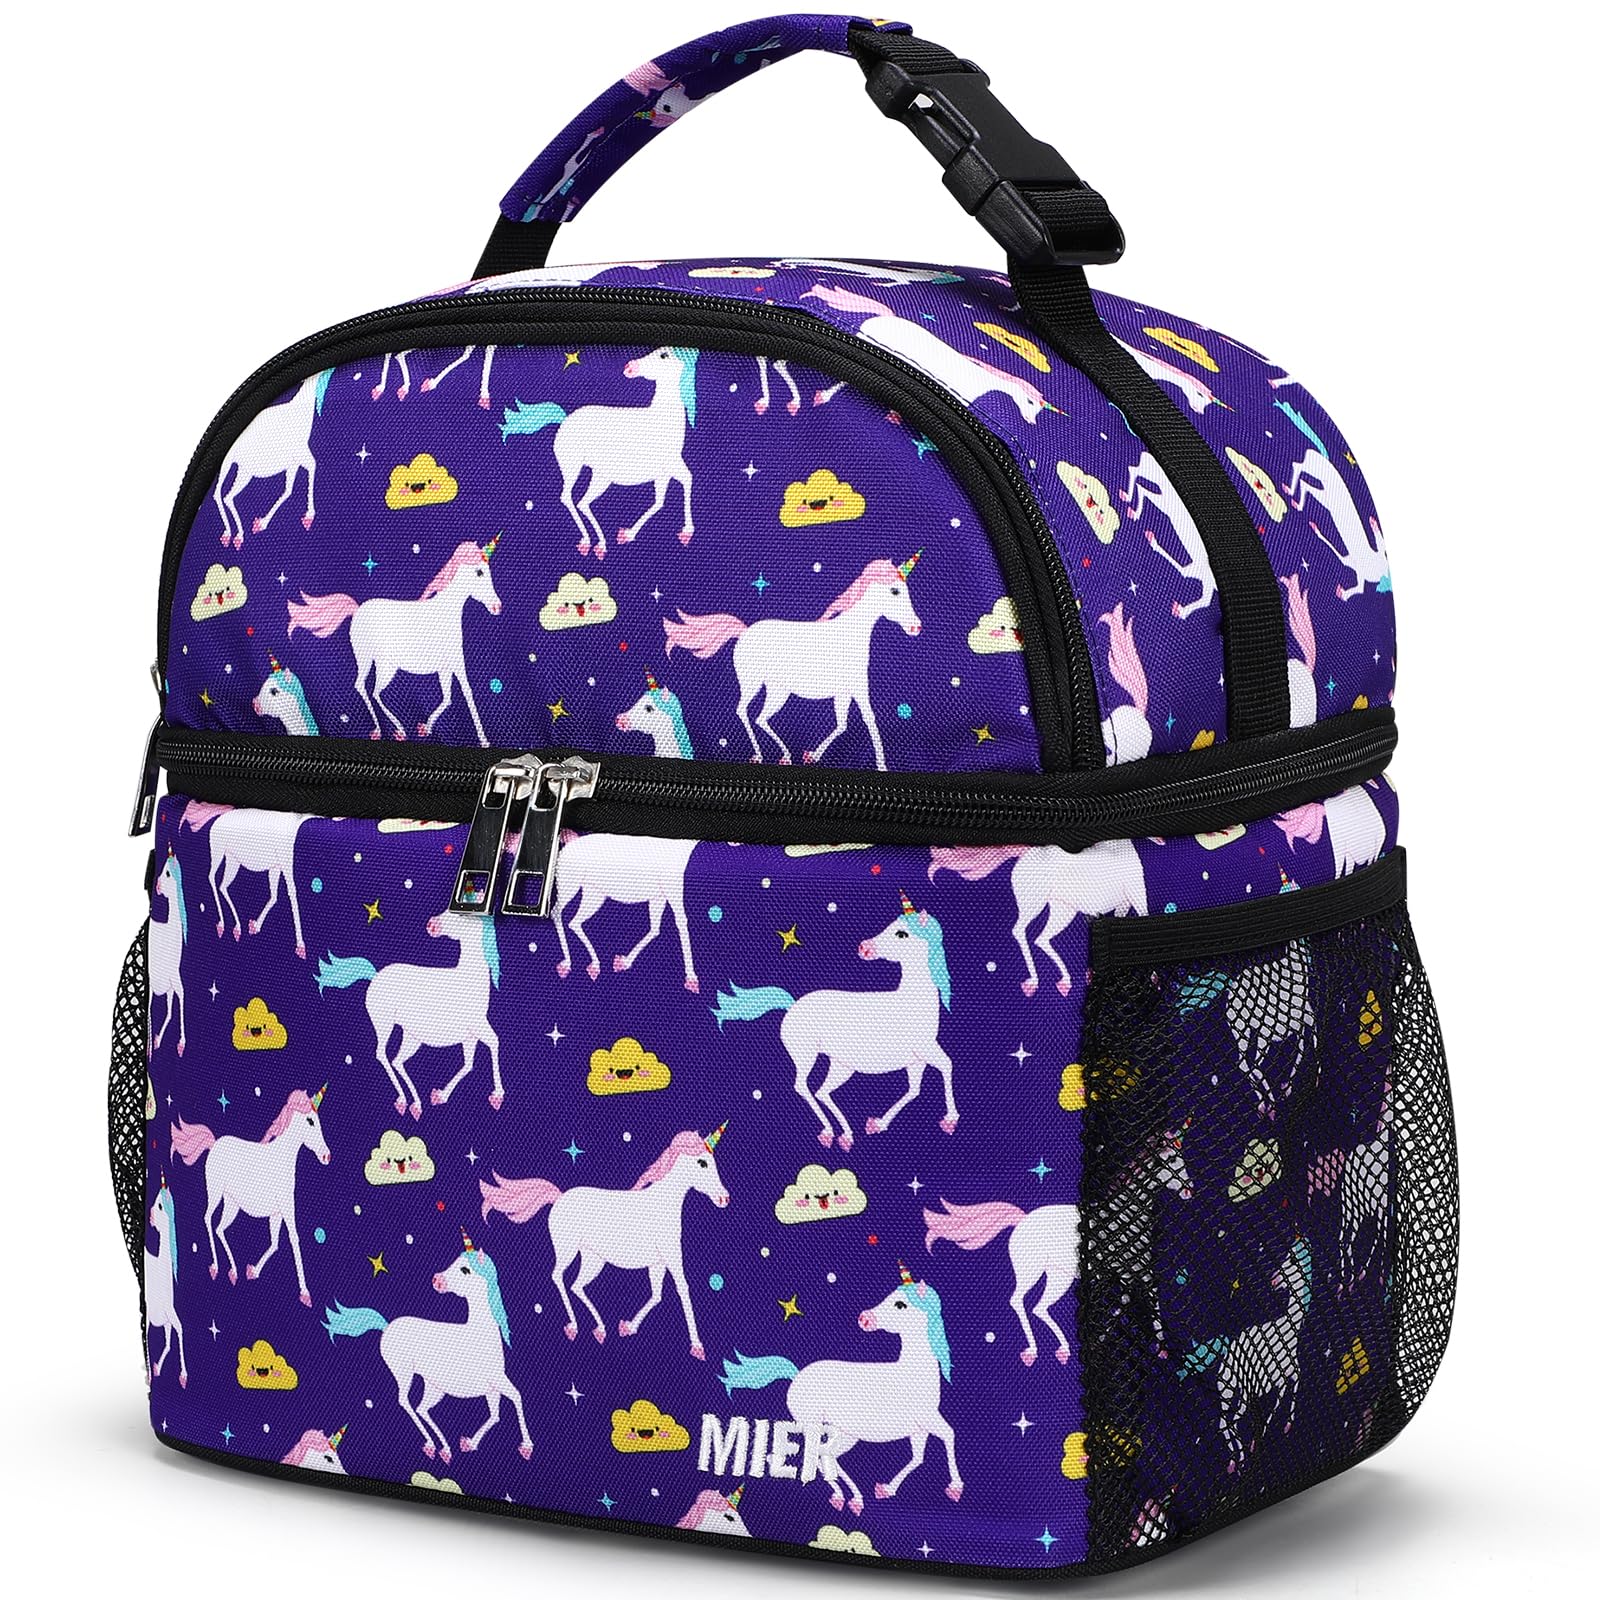 Kids Lunch Bag Insulated Toddlers Lunch Cooler Tote Kids Lunch Bag Purple Unicorn MIER